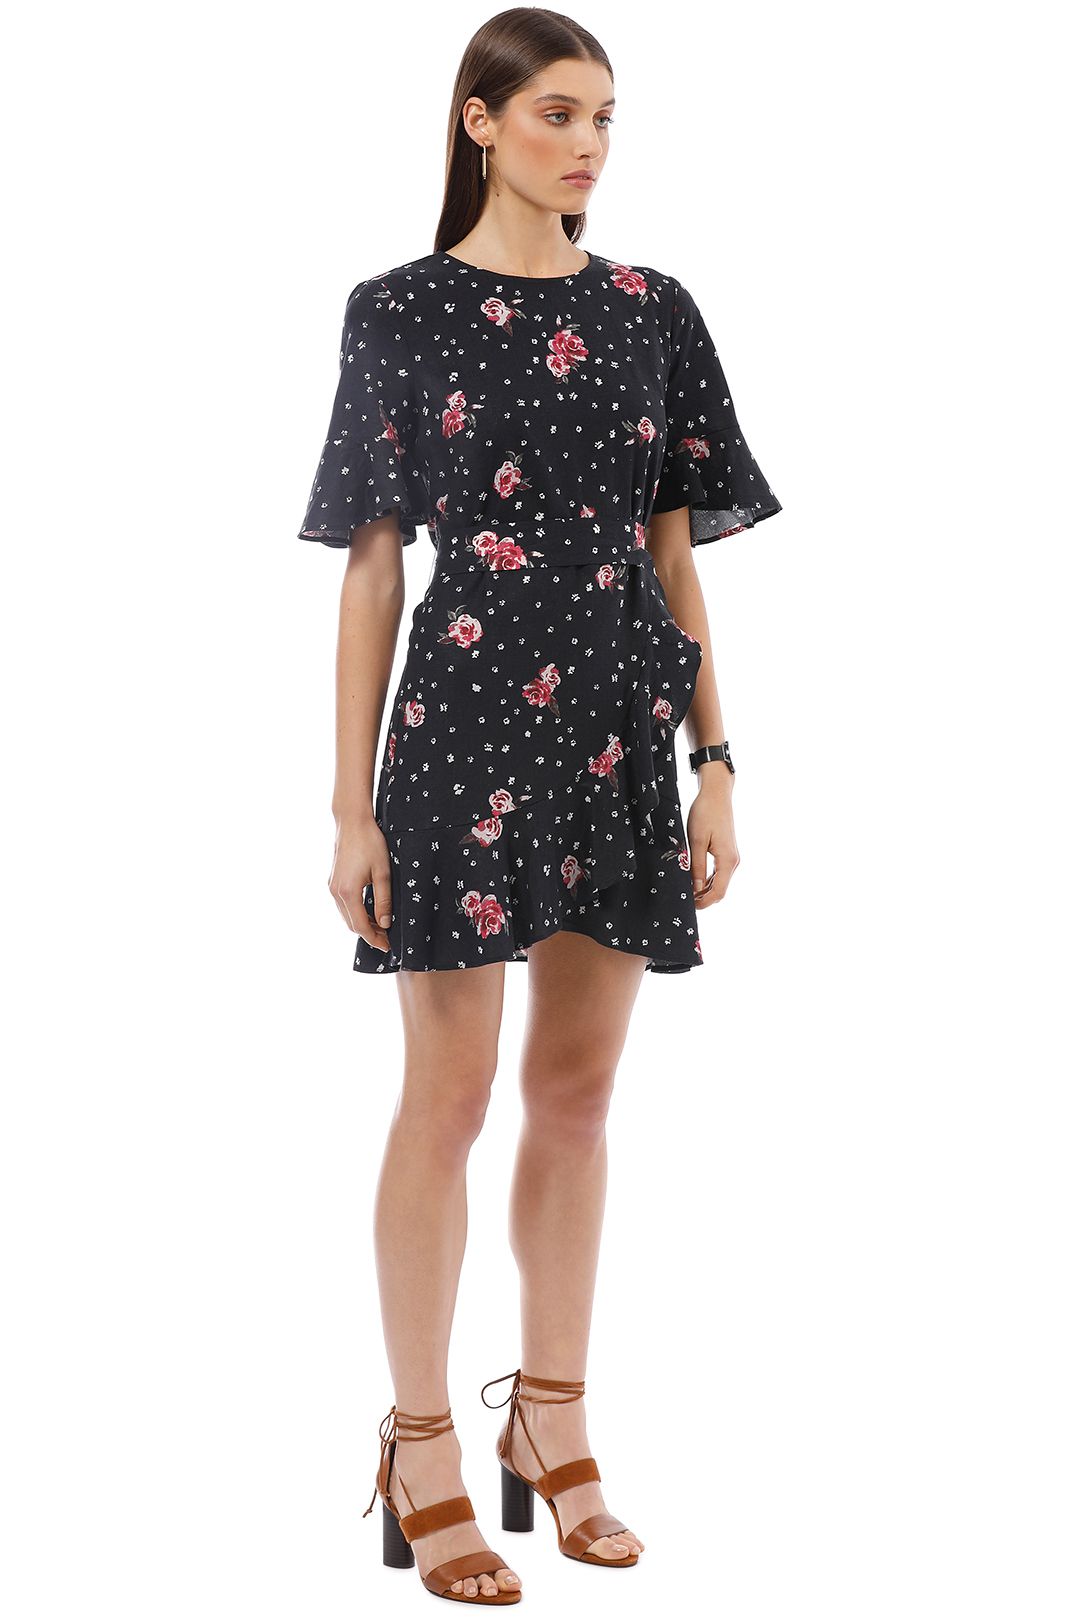 Rodeo Show - Midnight Dress - Black Floral - Side